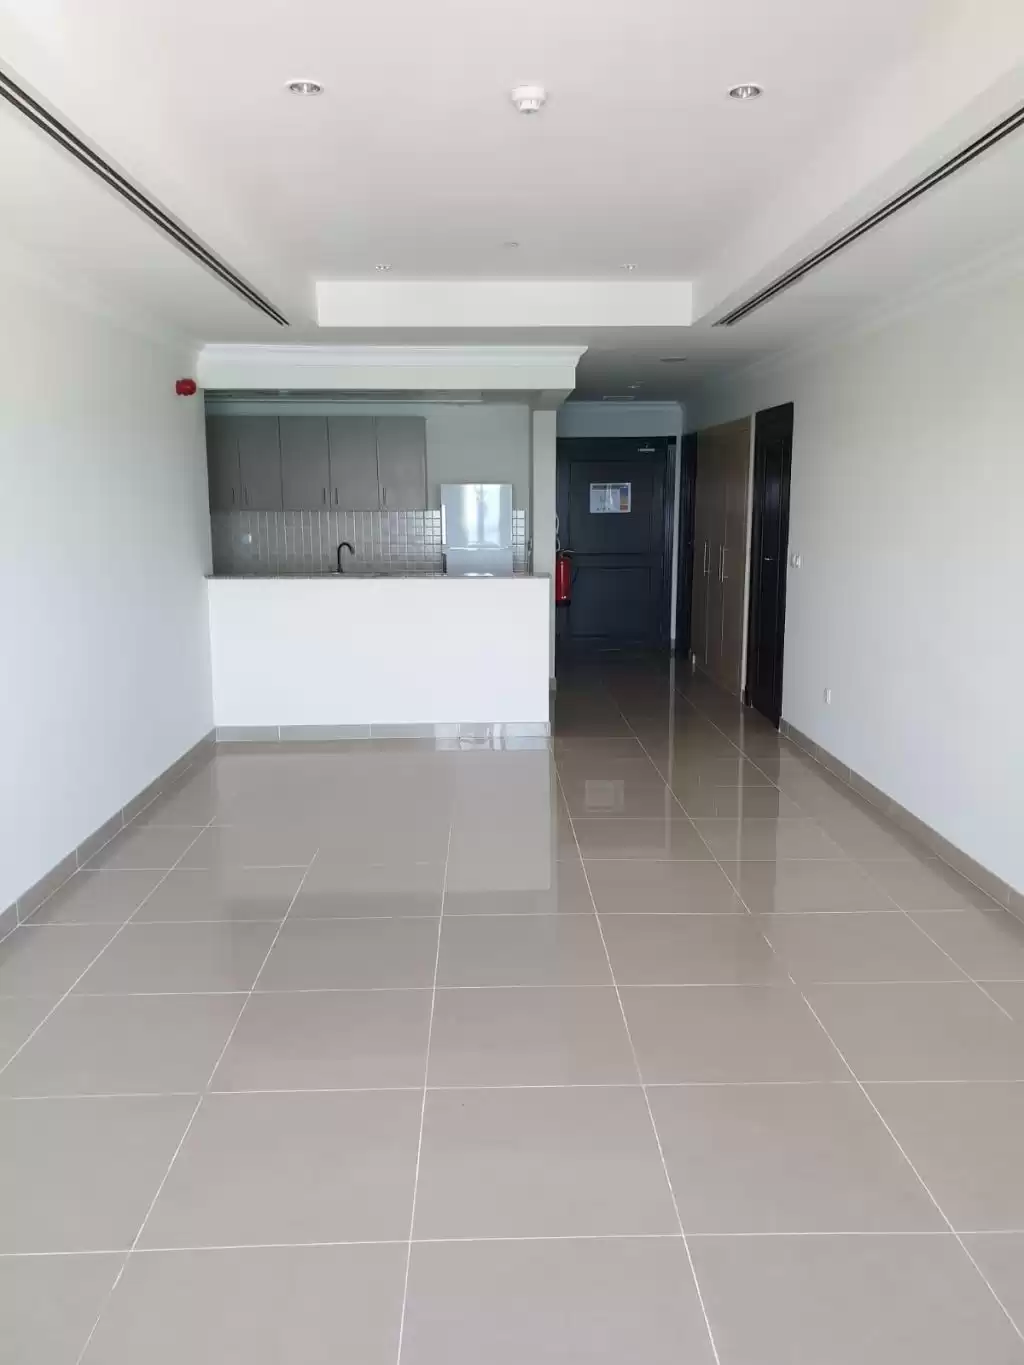 Residential Ready Property Studio S/F Apartment  for rent in Al Sadd , Doha #16461 - 1  image 